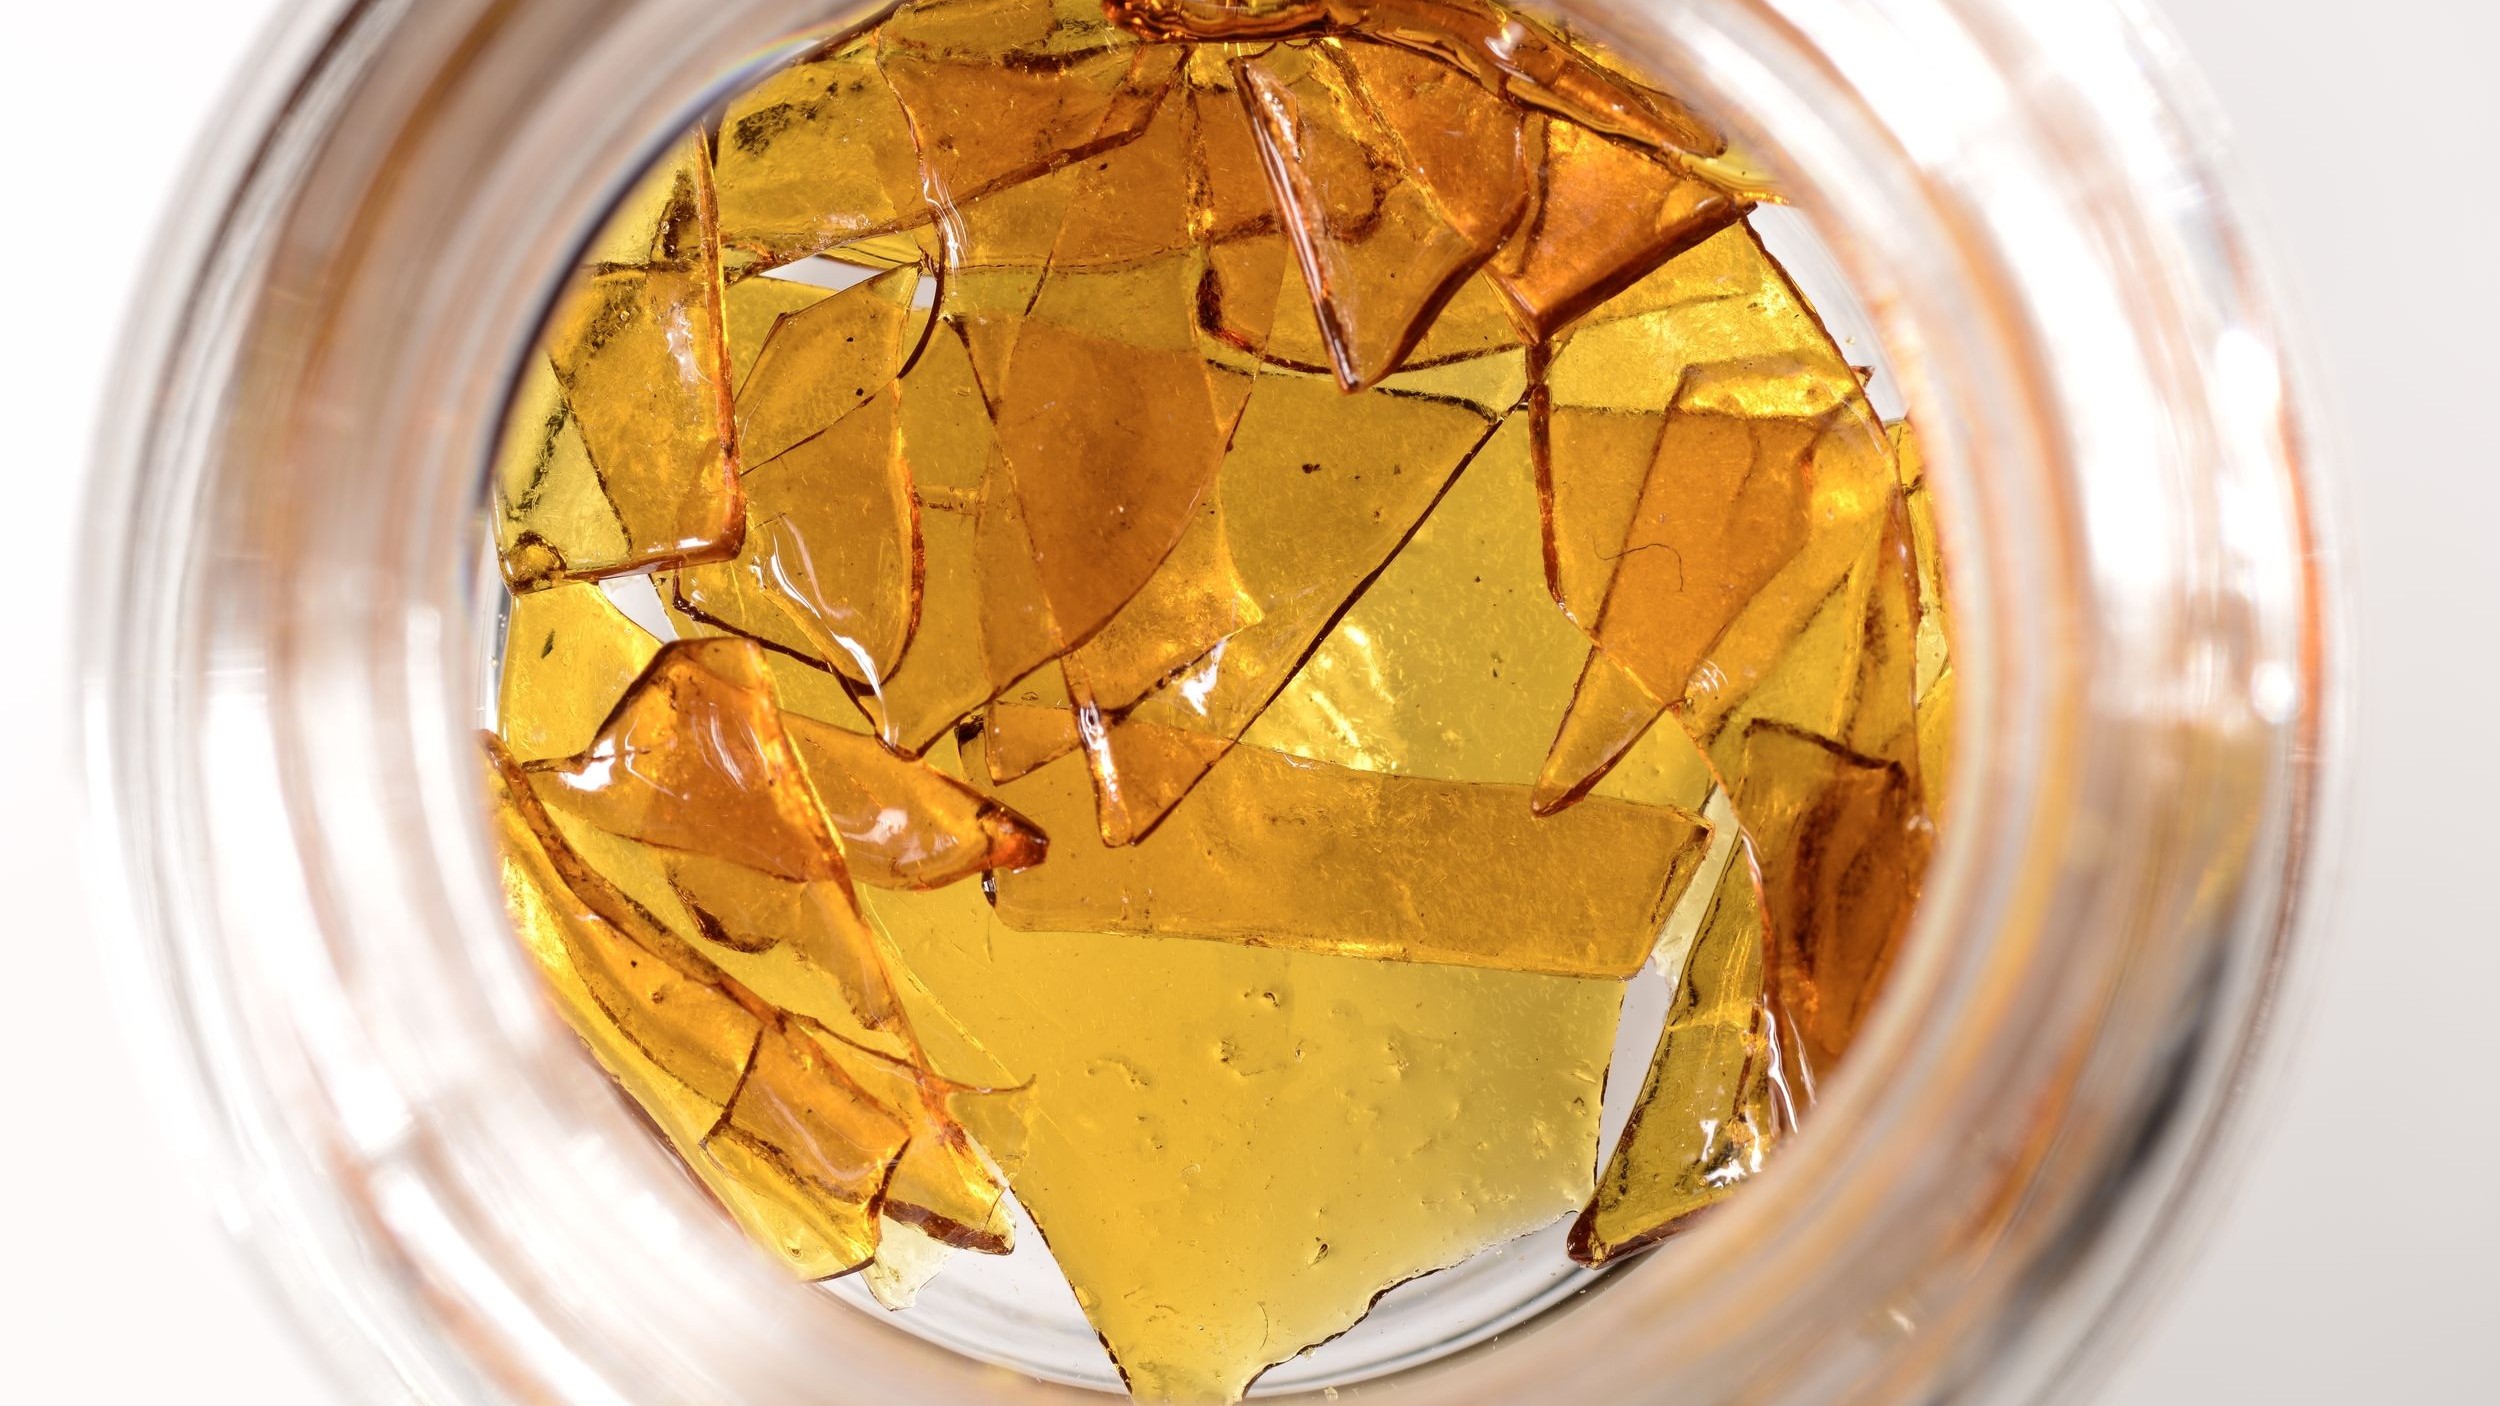 wax shatter dabs compass seal